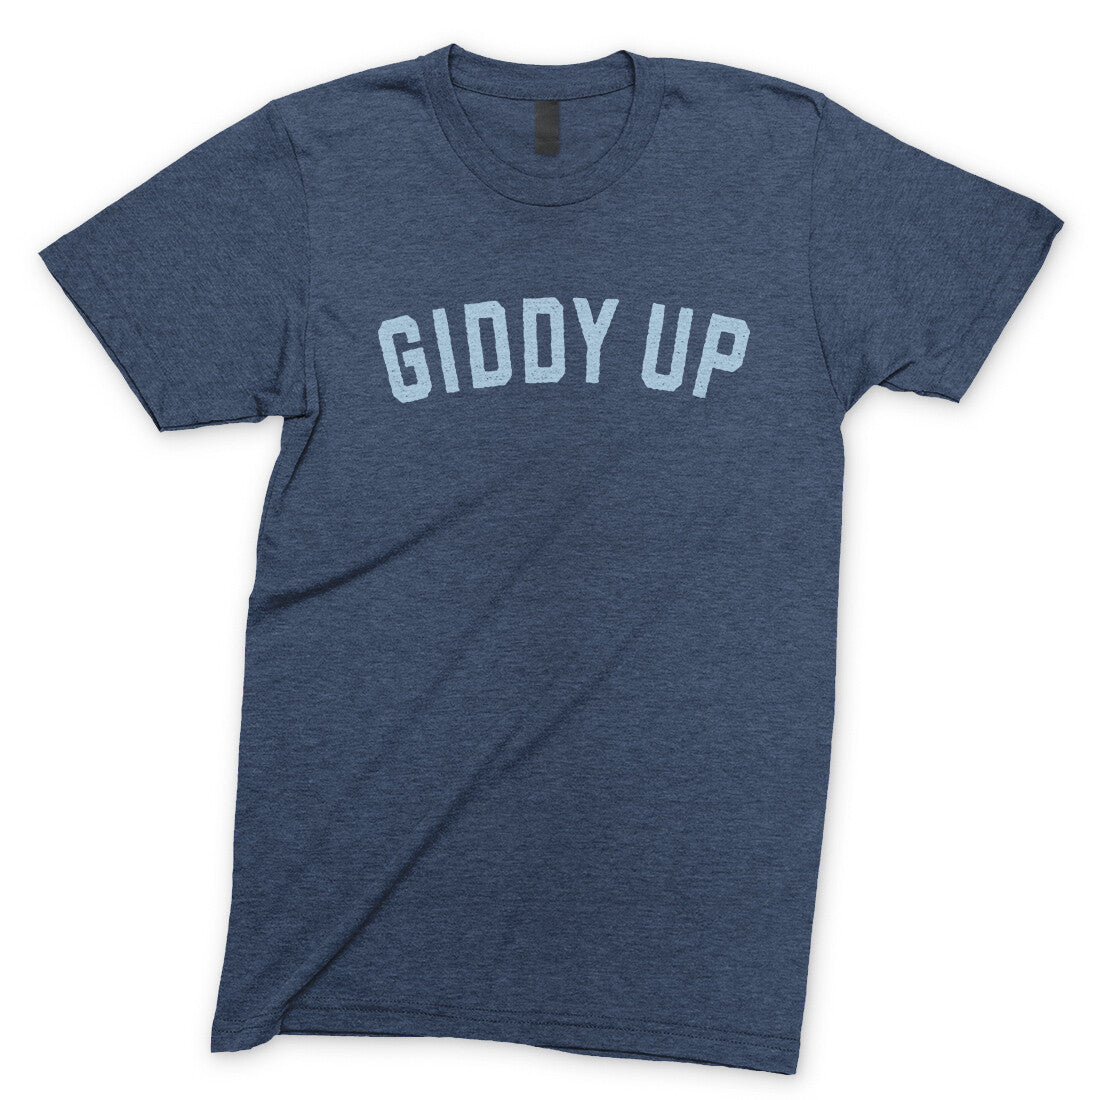 Giddy Up in Navy Heather Color